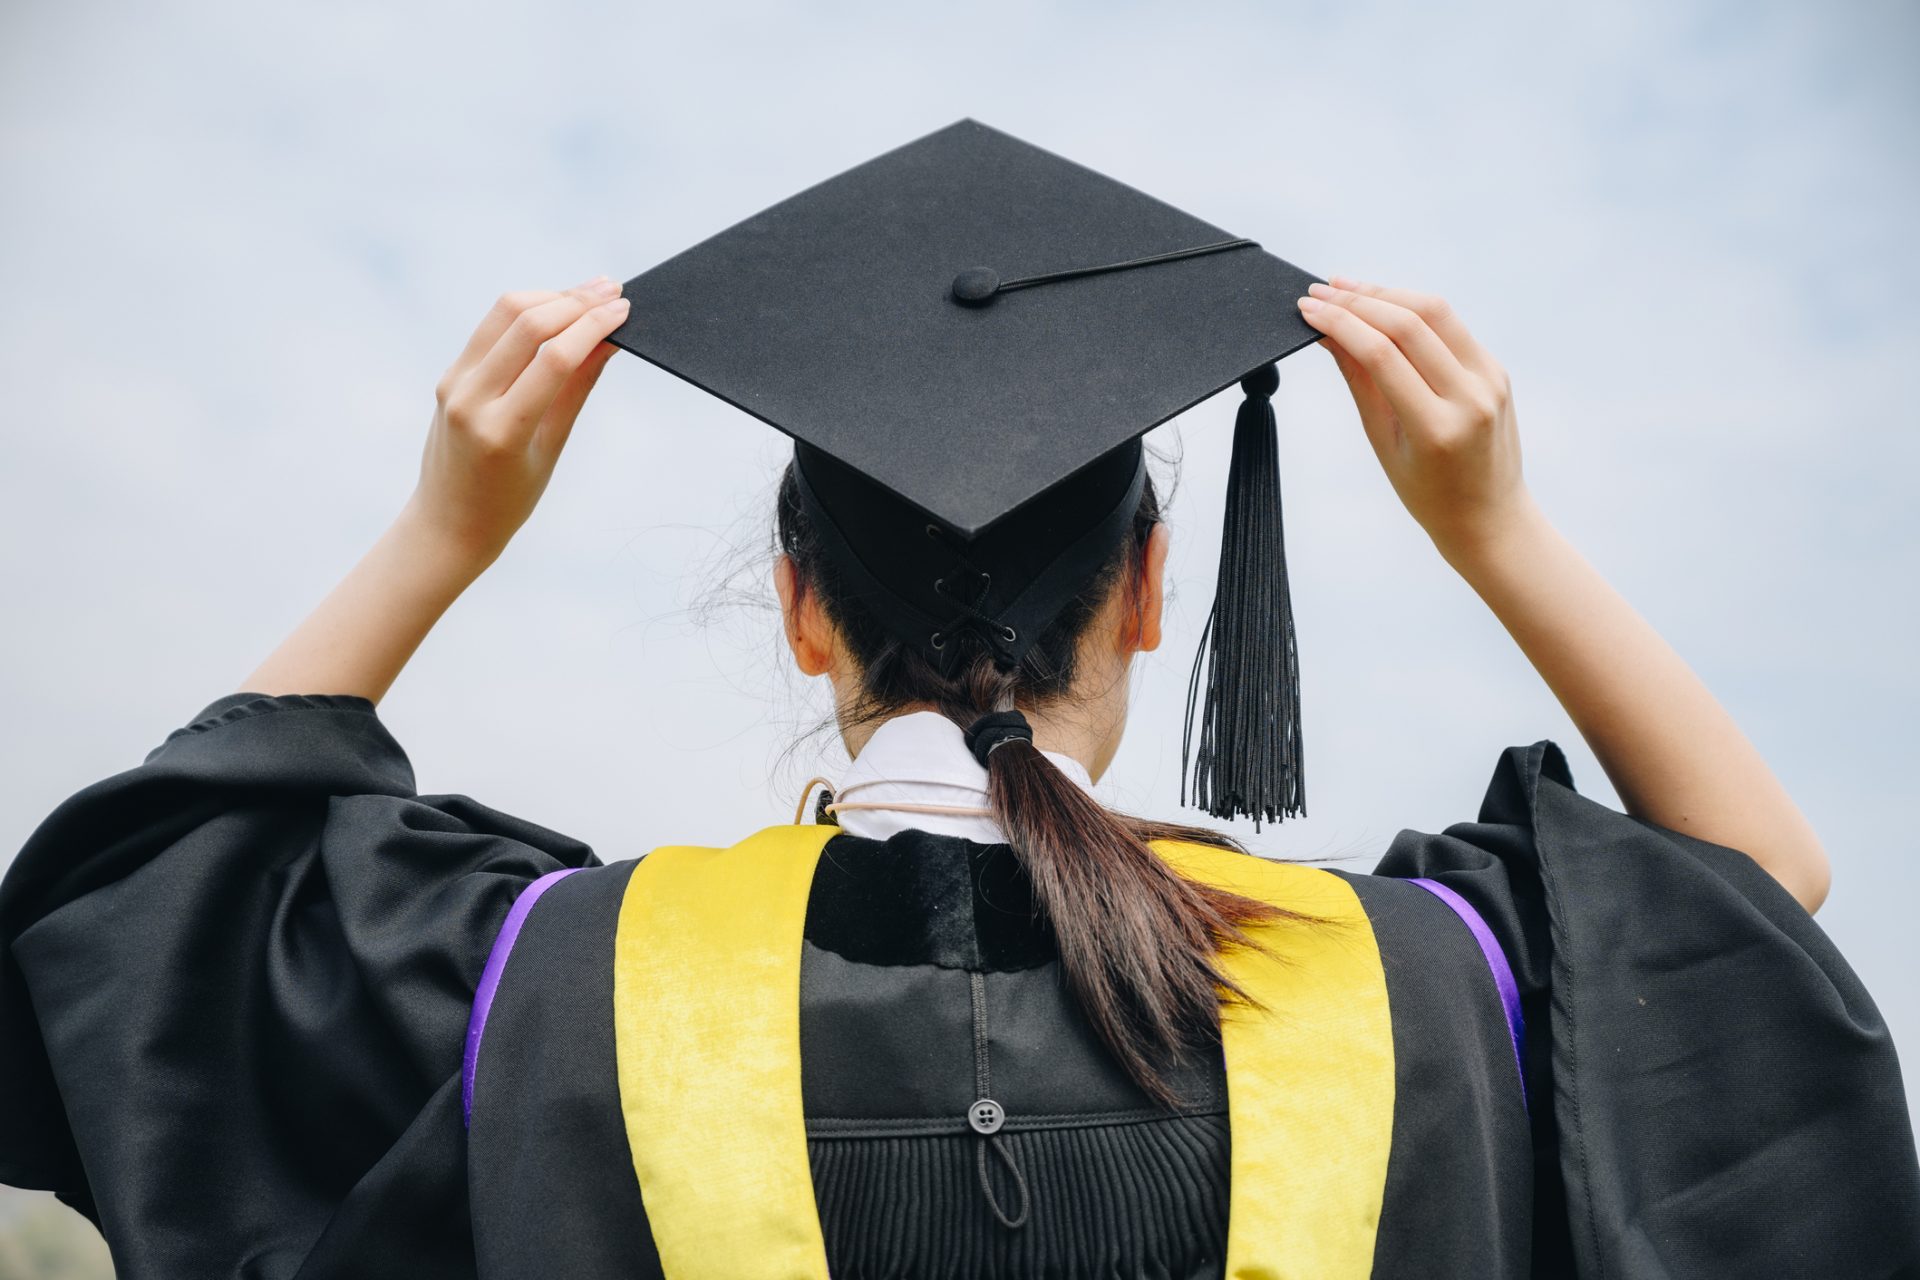 What about the best college degrees?